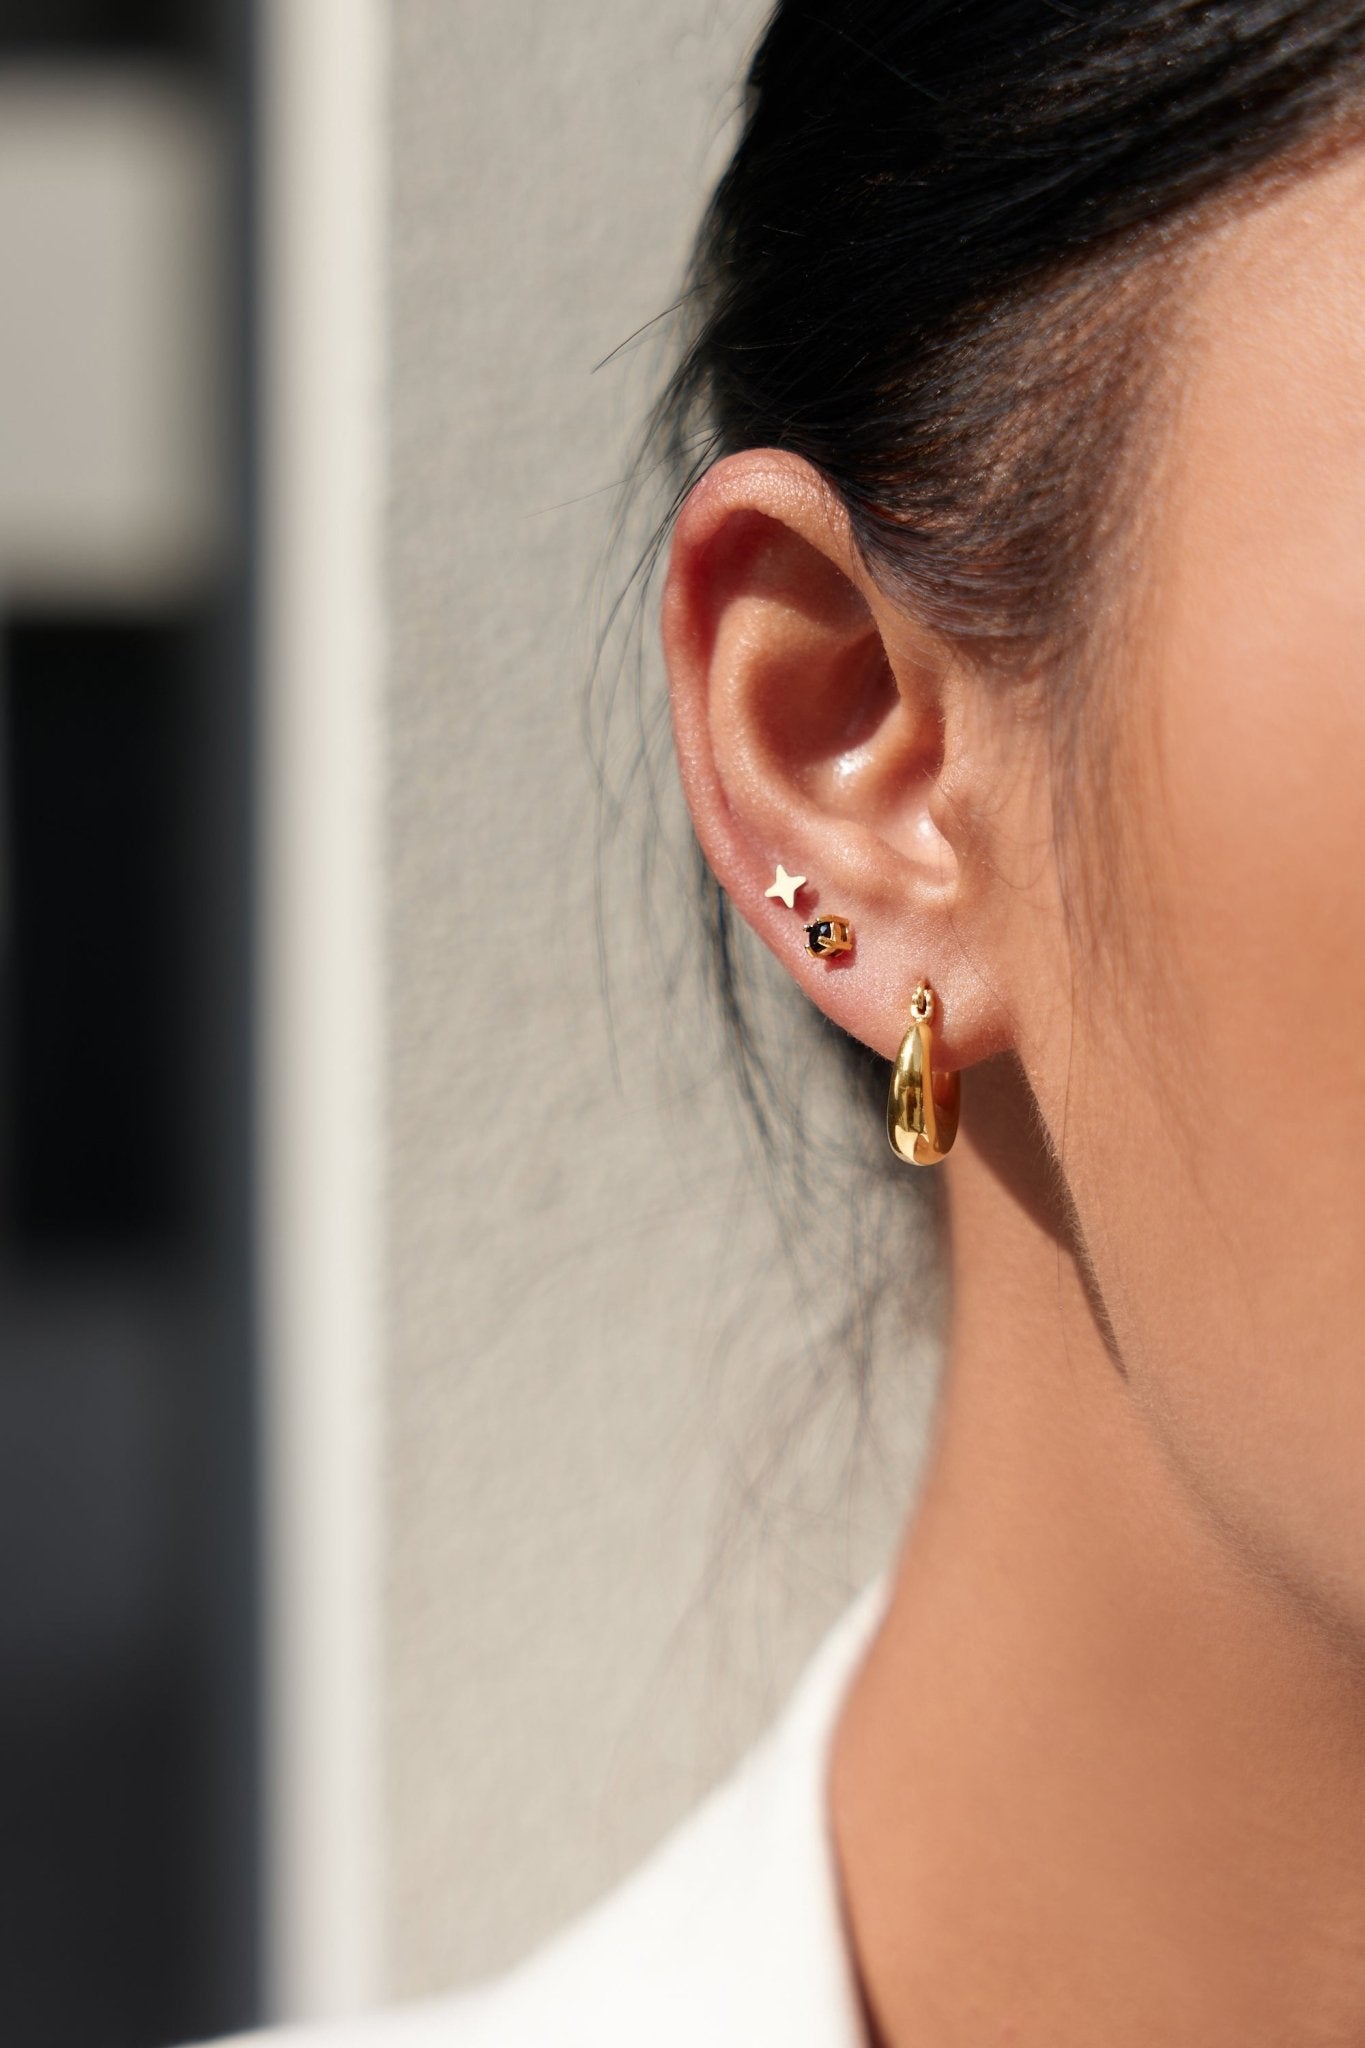 Puffed Mini Earrings in Gold - Flaire & Co.